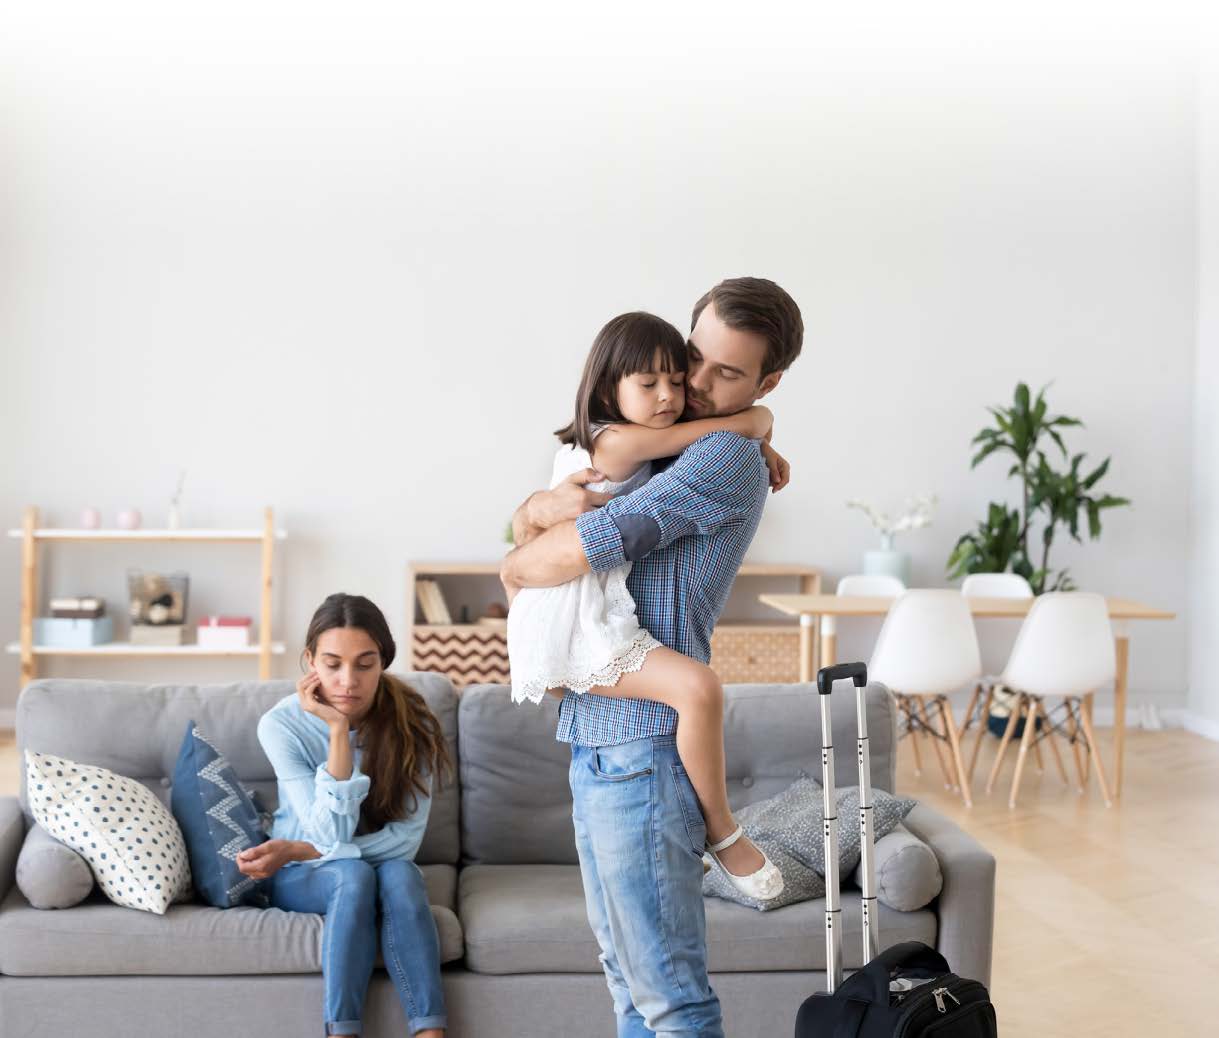 mand holding child and woman sitting in living room